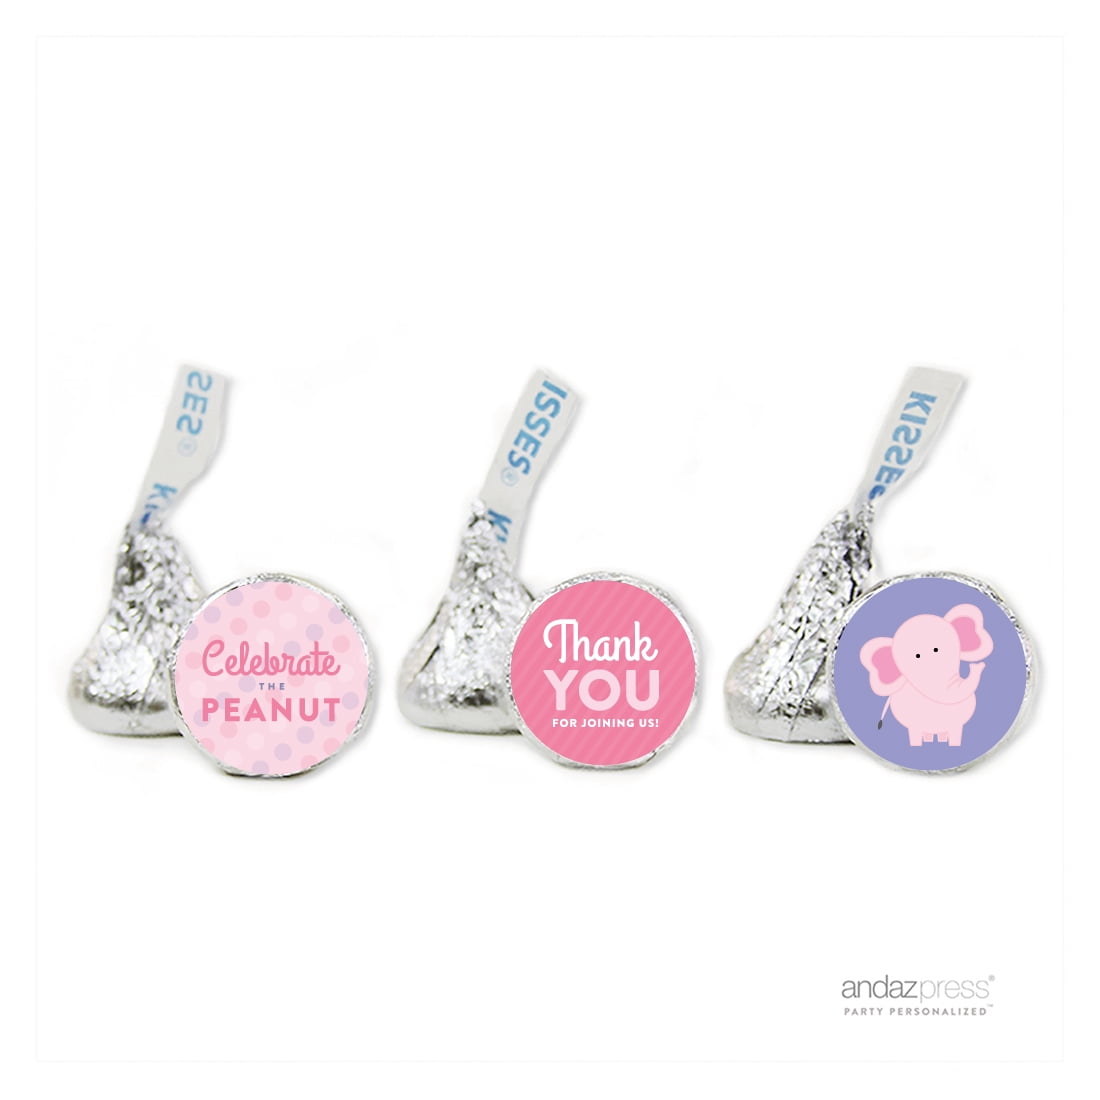 216 IT'S A GIRL BABY SHOWER HERSHEY KISS STICKERS FAVORS PARTY PINK LABELS